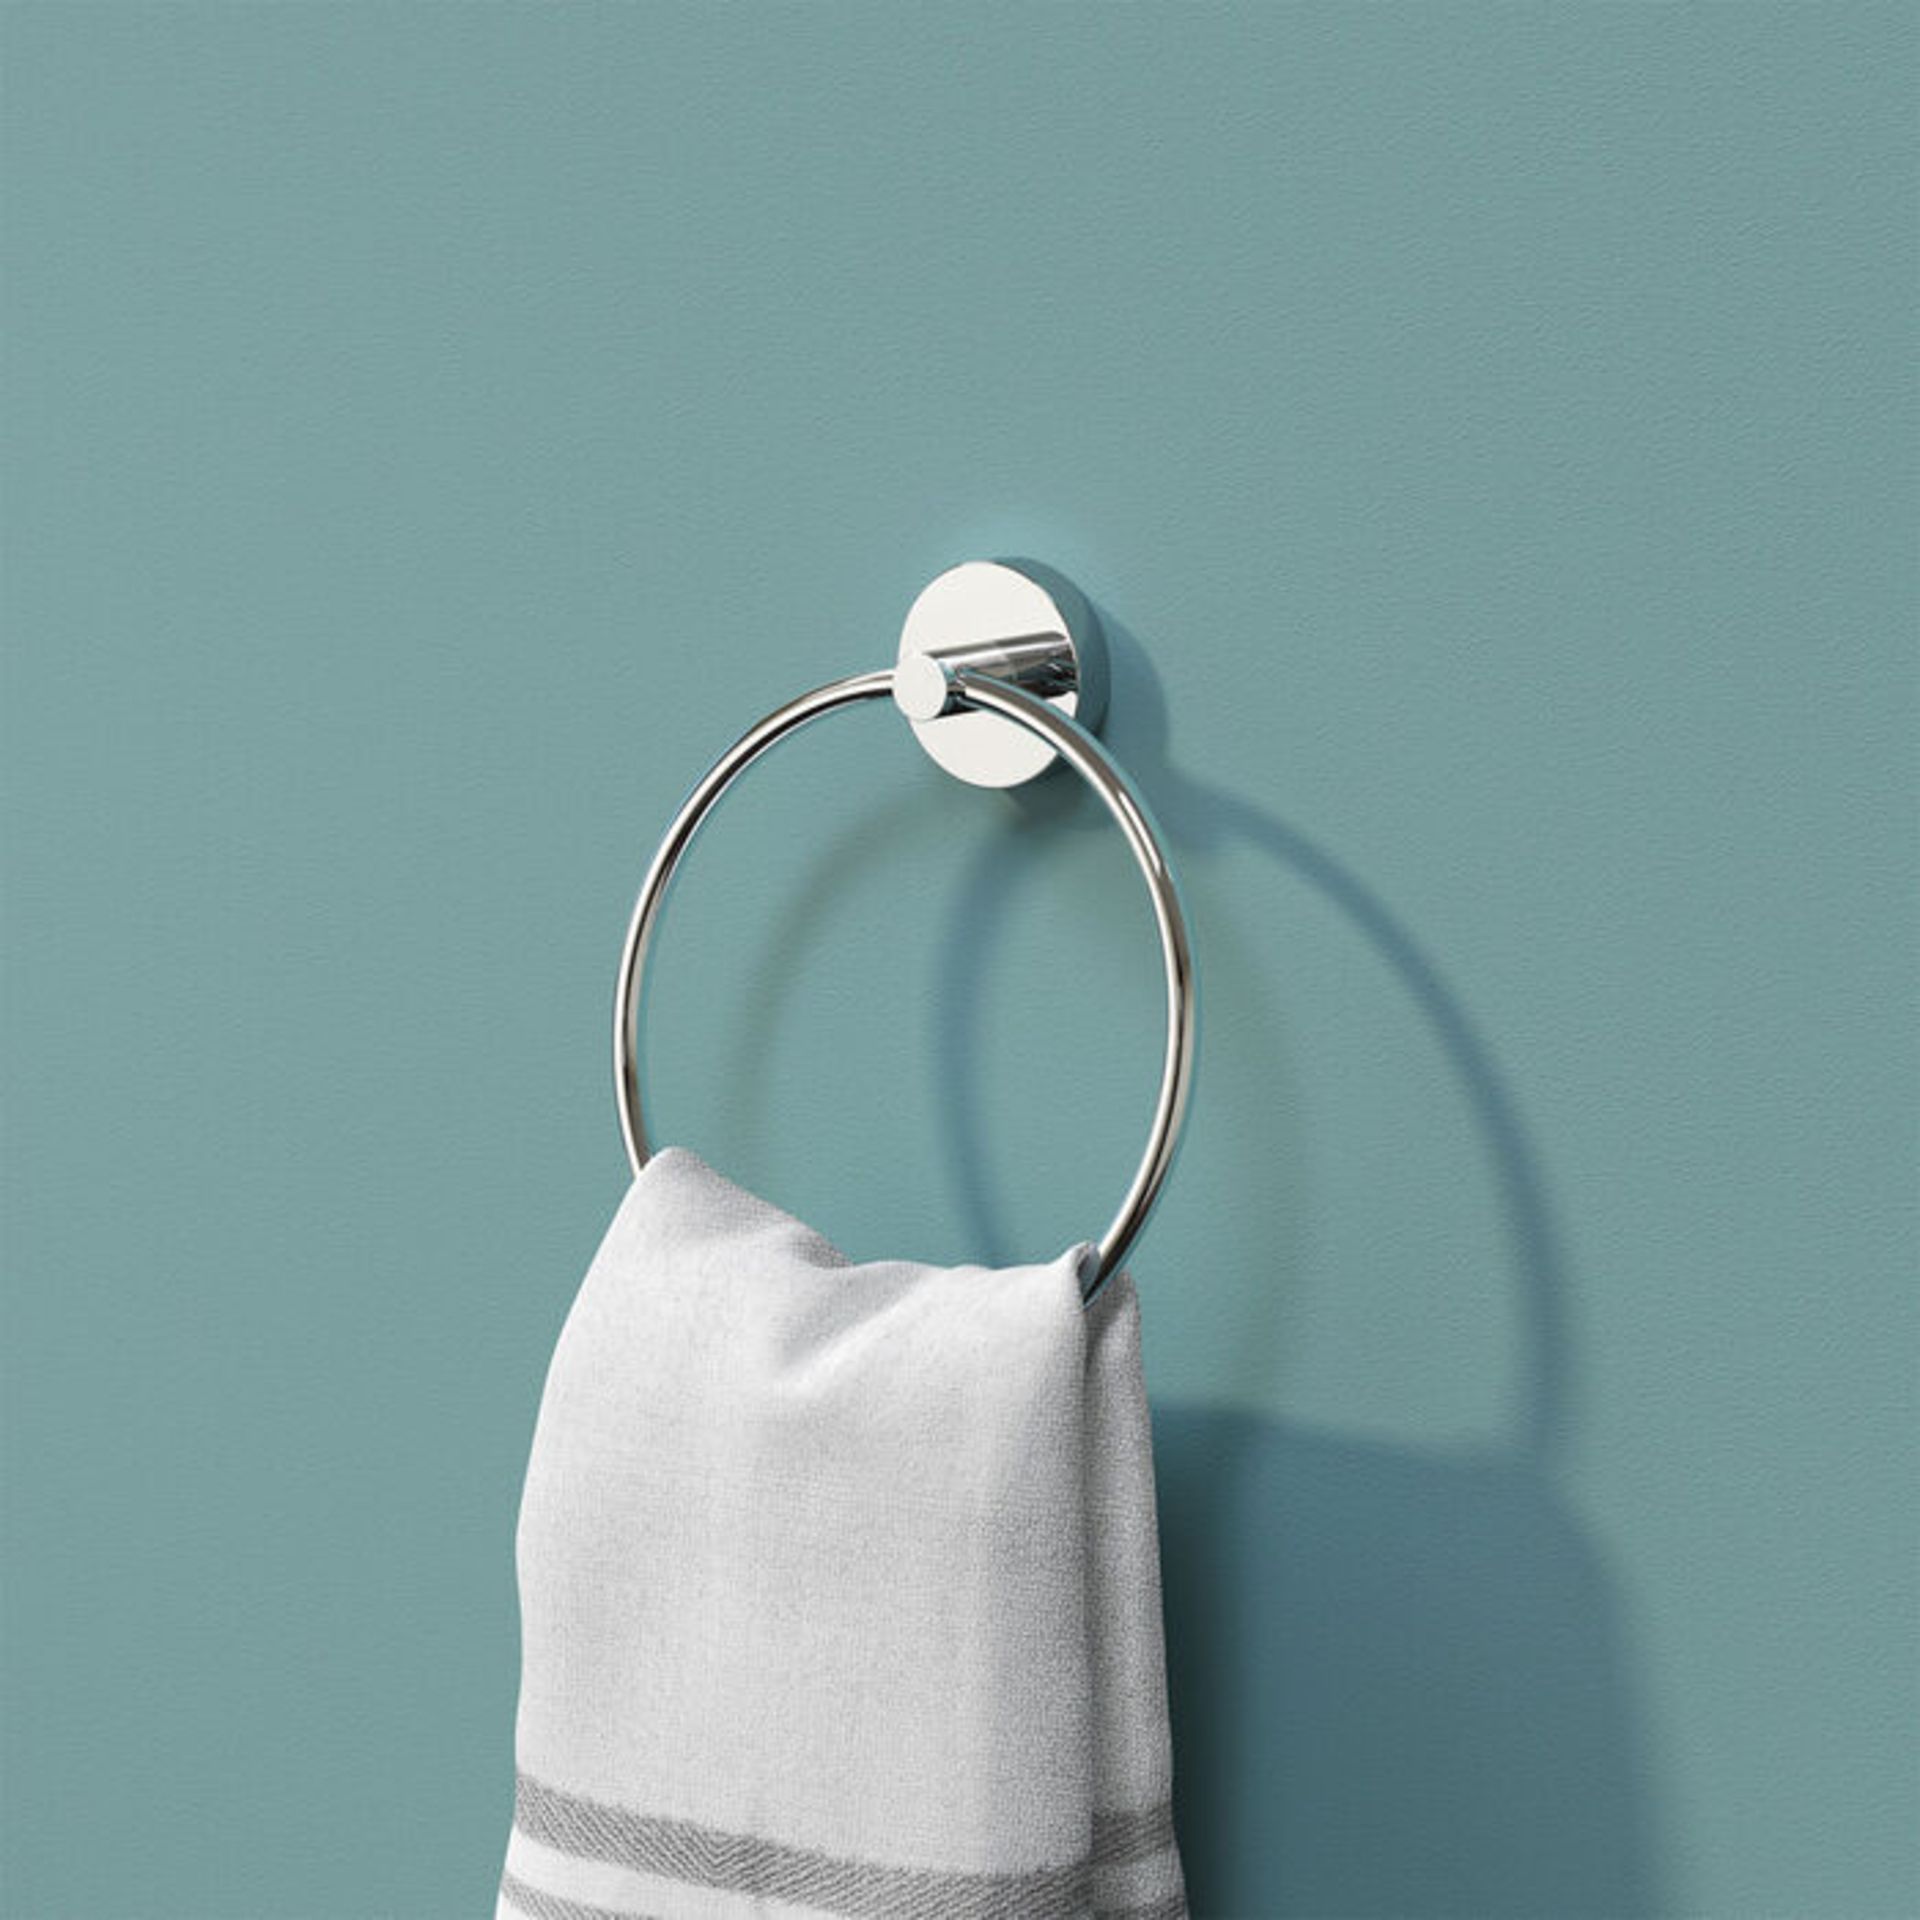 (M1091) Finsbury Towel Ring. Simple yet stylish Completes your bathroom with a little extra fu...